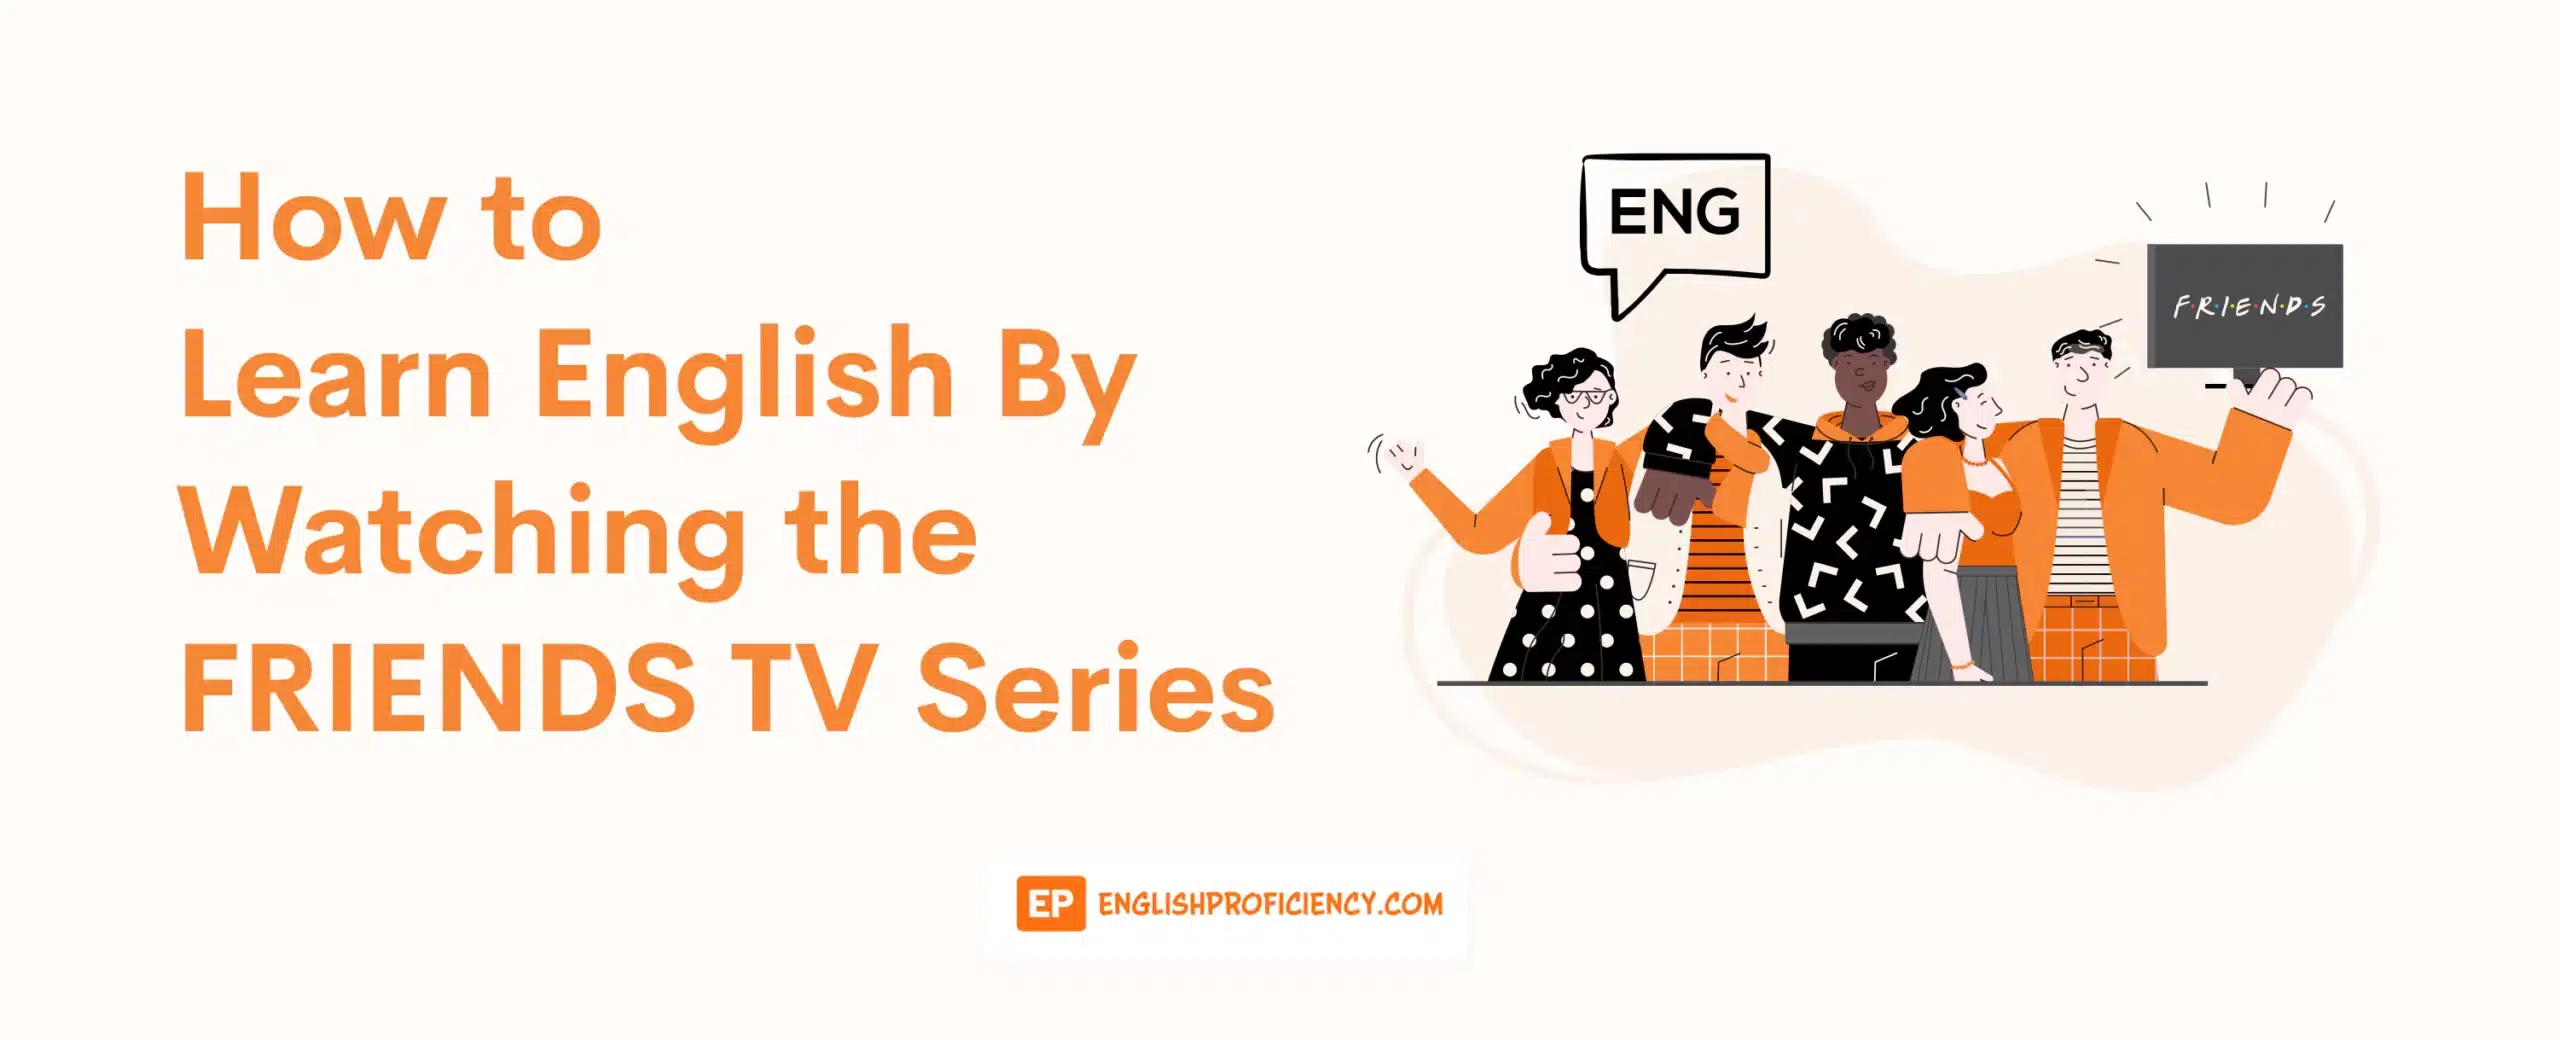 How to Learn English By Watching the FRIENDS TV Series